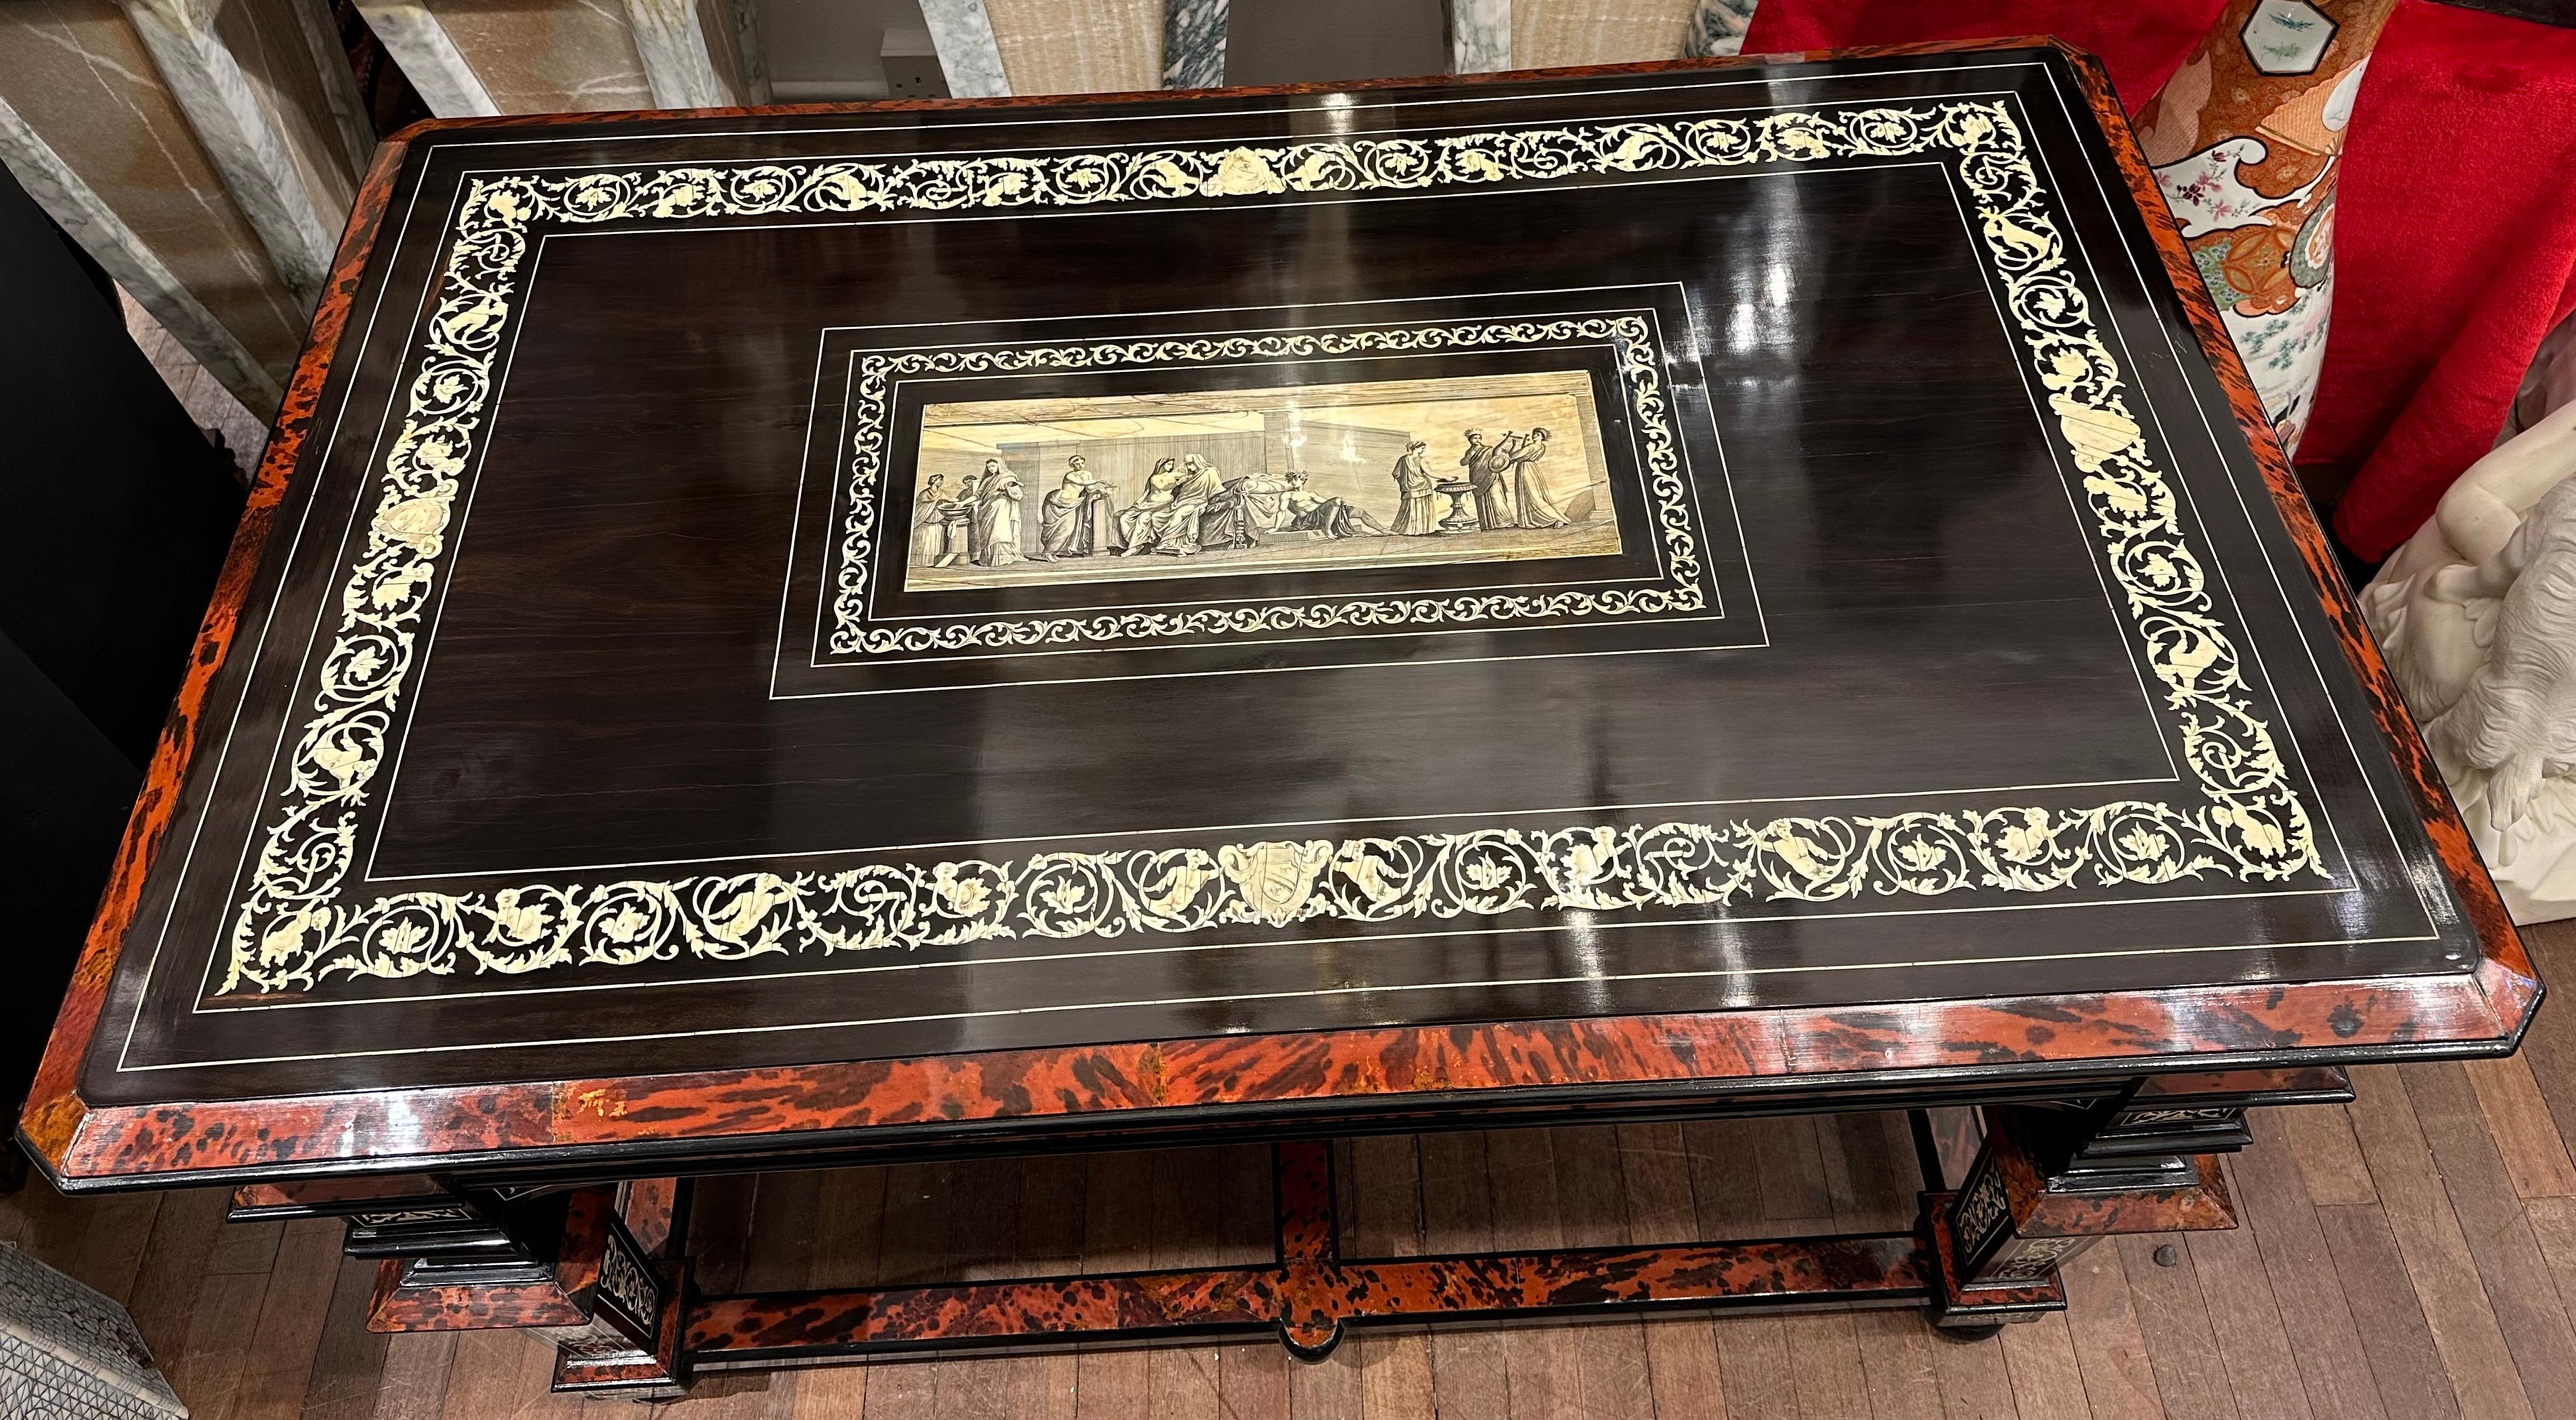 A truly stunning Italian inlaid table with intricately drawn pen work to the sides and top by renown Cabinetmaker Ferdinando Pogliani. It has a stretcher base with small bun feet and one drawer.  Ferdinando Pogliani was an important cabinetmaker